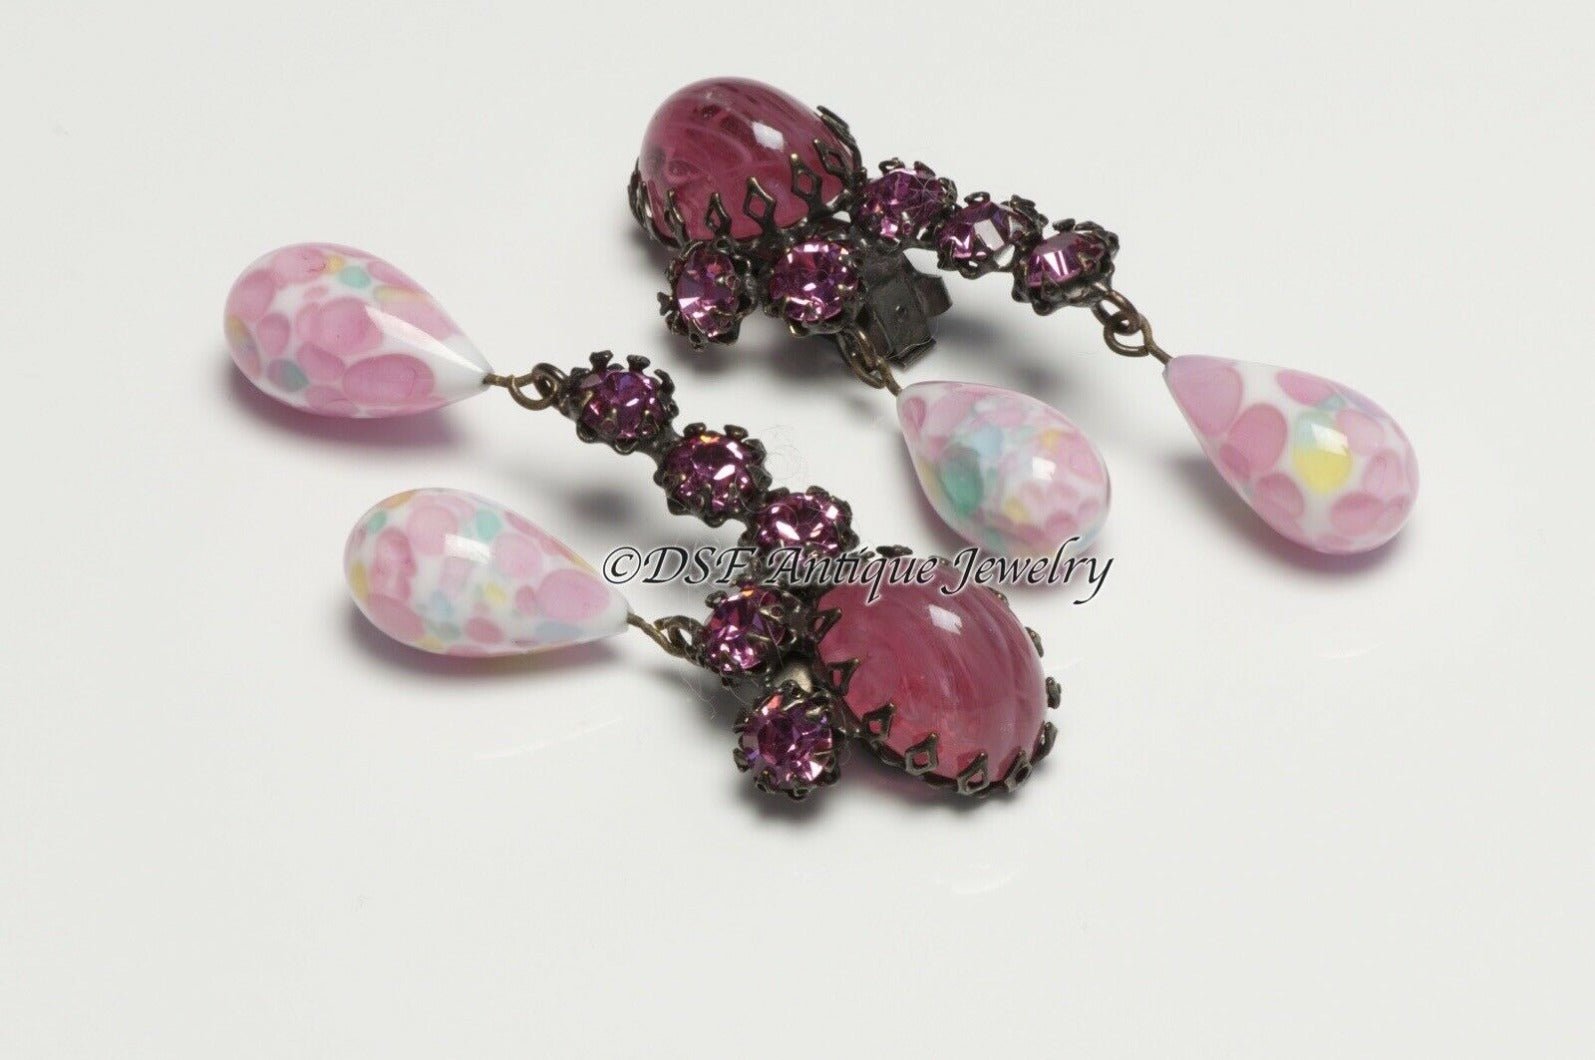 SCHREINER NY 1950’s Pink Cabochon Glass Crystal Drop Earrings